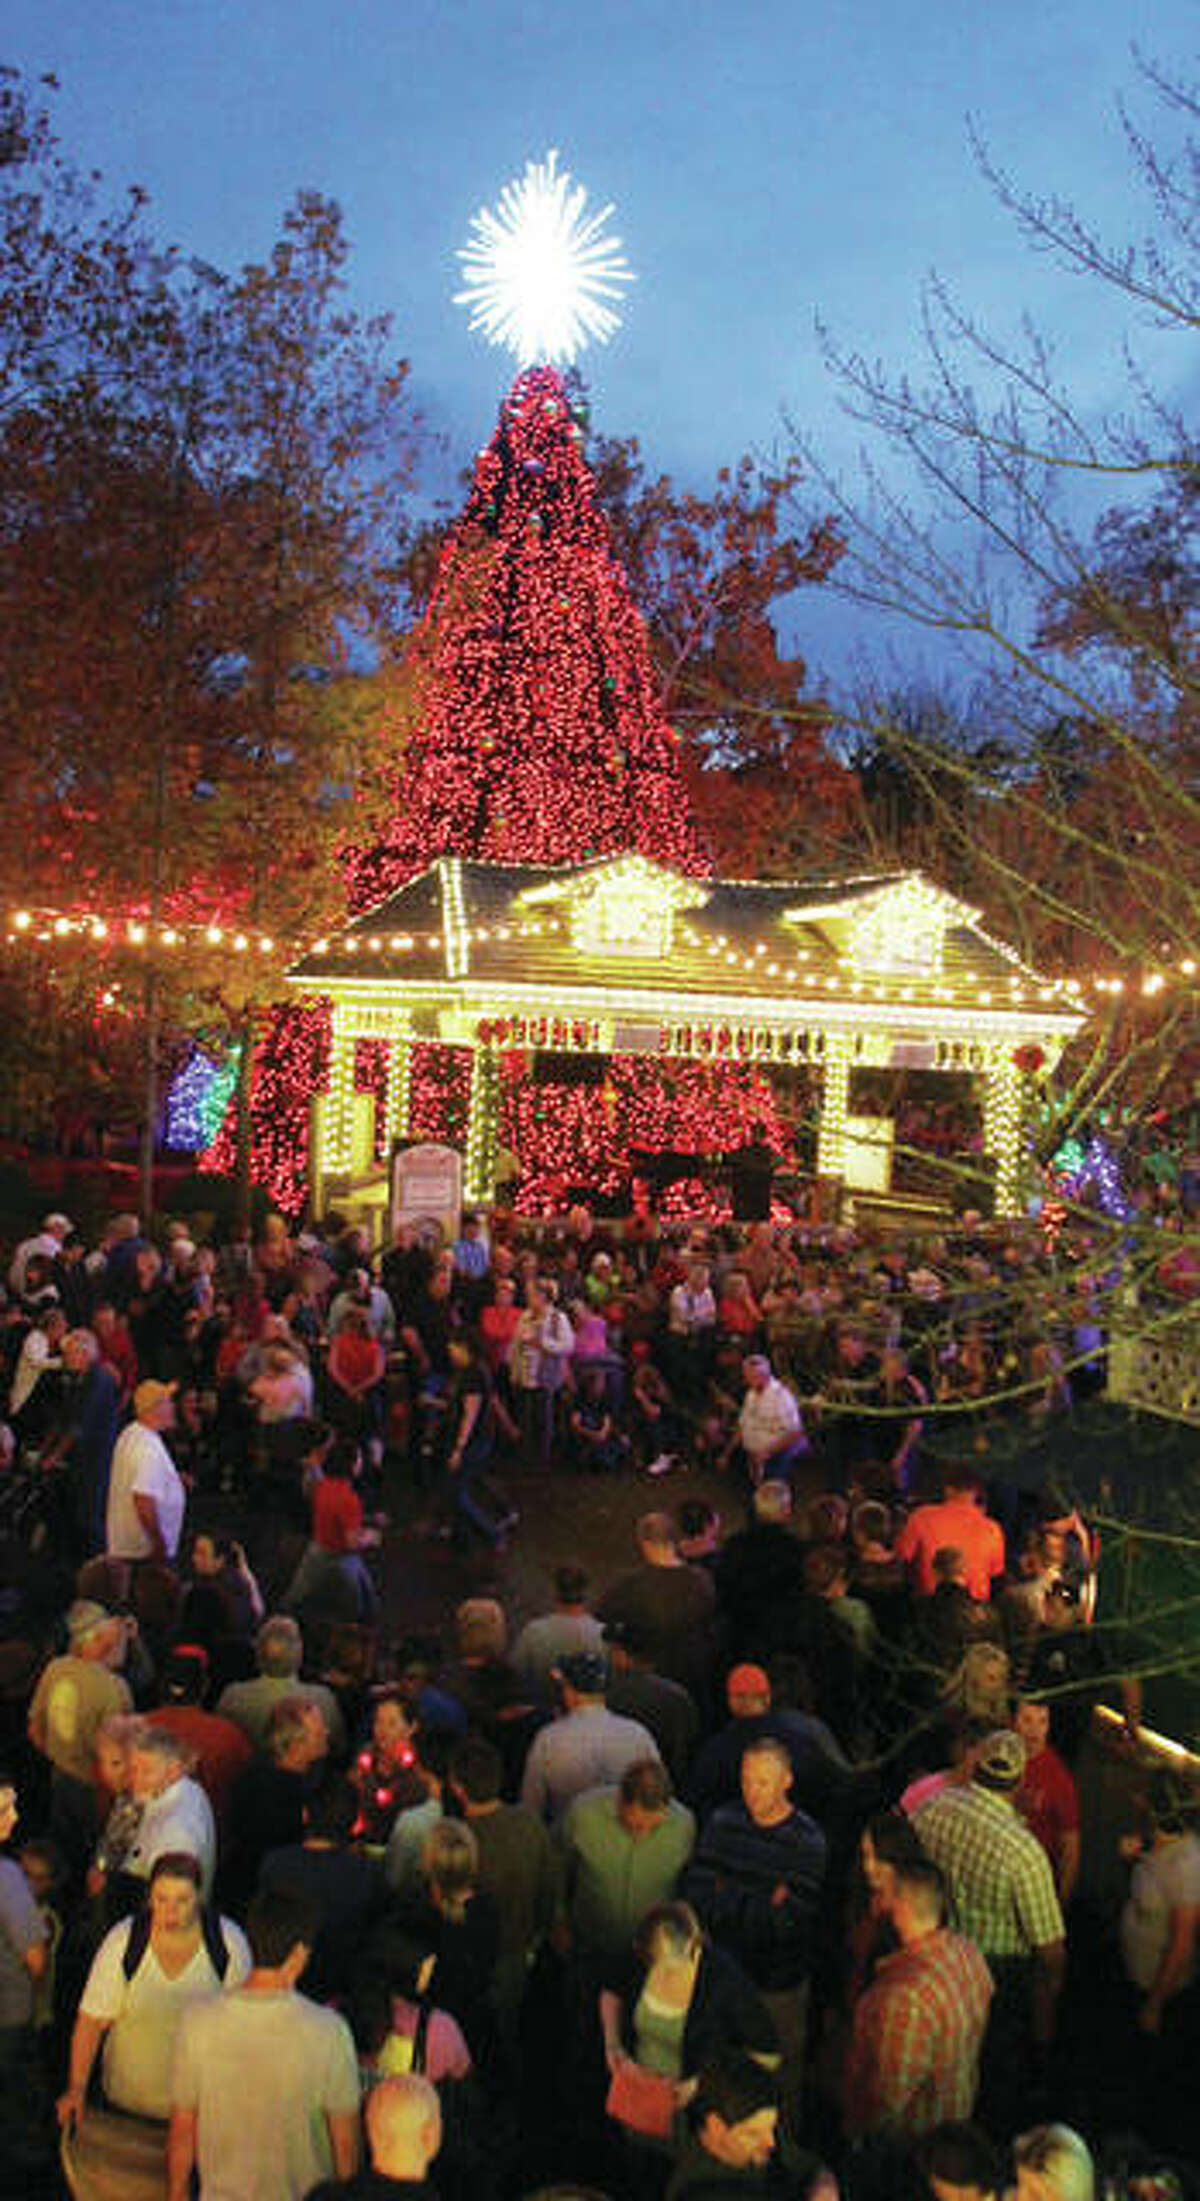 People watch the lighting of the five-story Christmas tree at Silver Dollar City in Branson, Missouri. The Christmas season runs now through Saturday, Dec. 30, at the theme park, and is part of the larger “Ozark Mountain Christmas” in Branson.